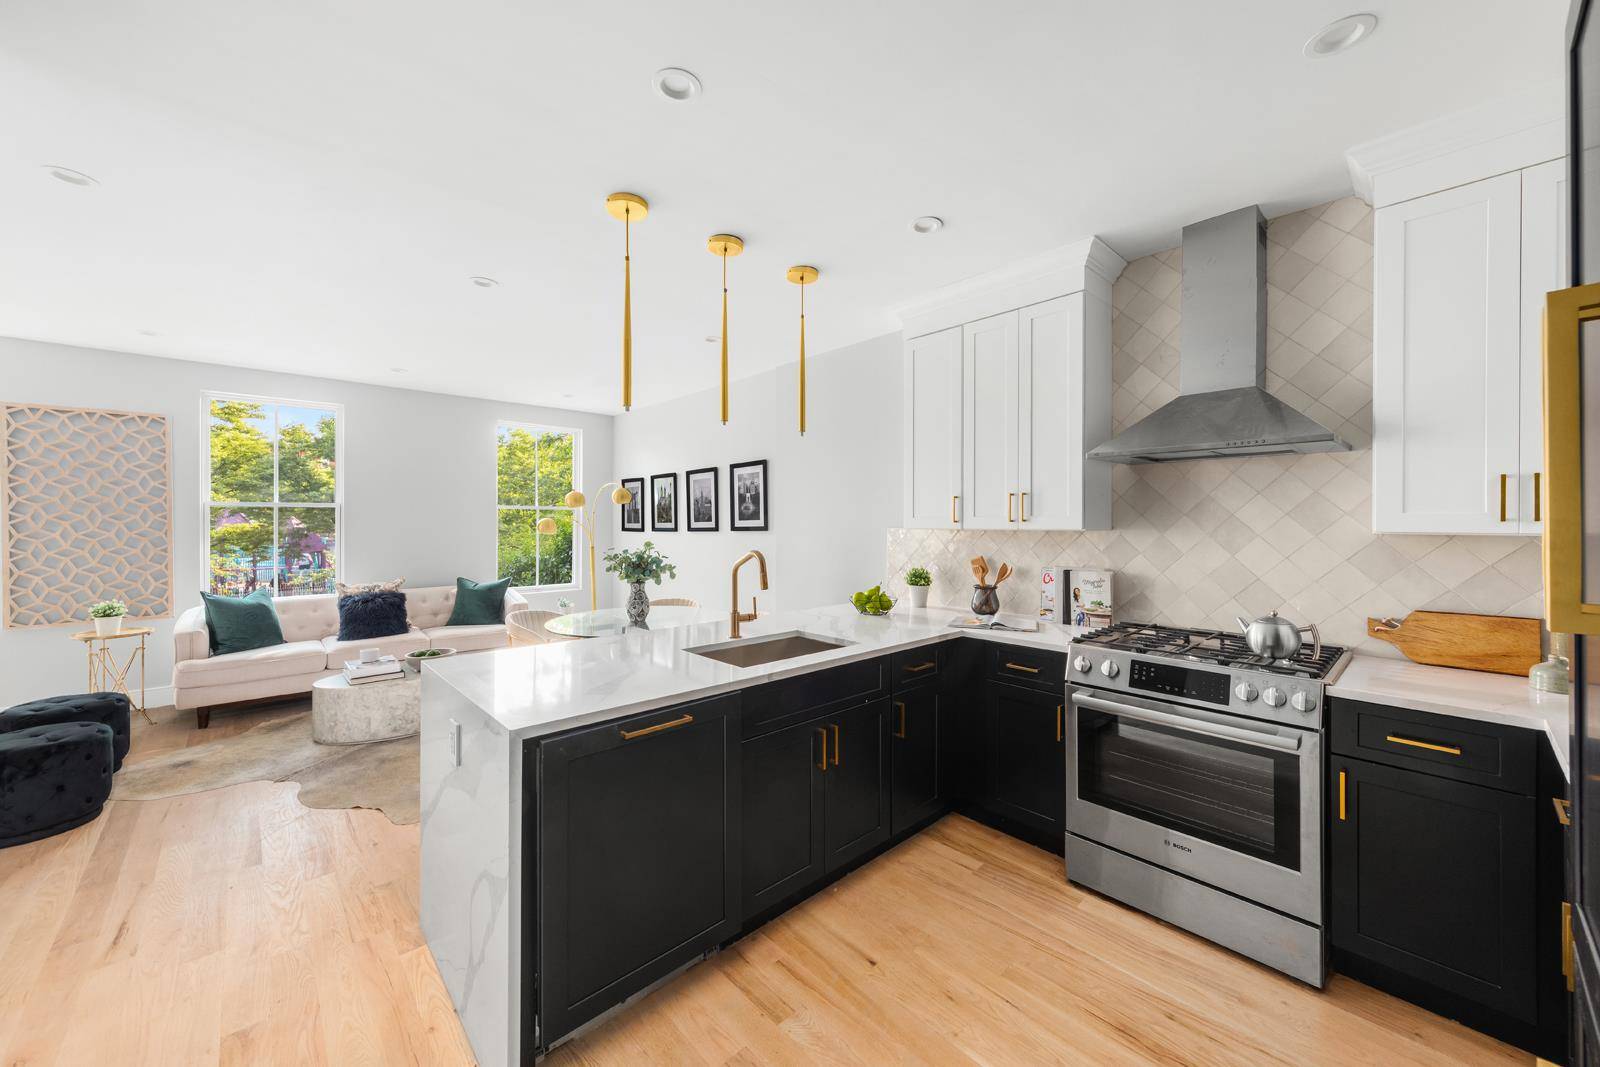 Welcome home to 351 Warren Street, a classic Brooklyn brownstone that has been reborn as four new condominium homes.